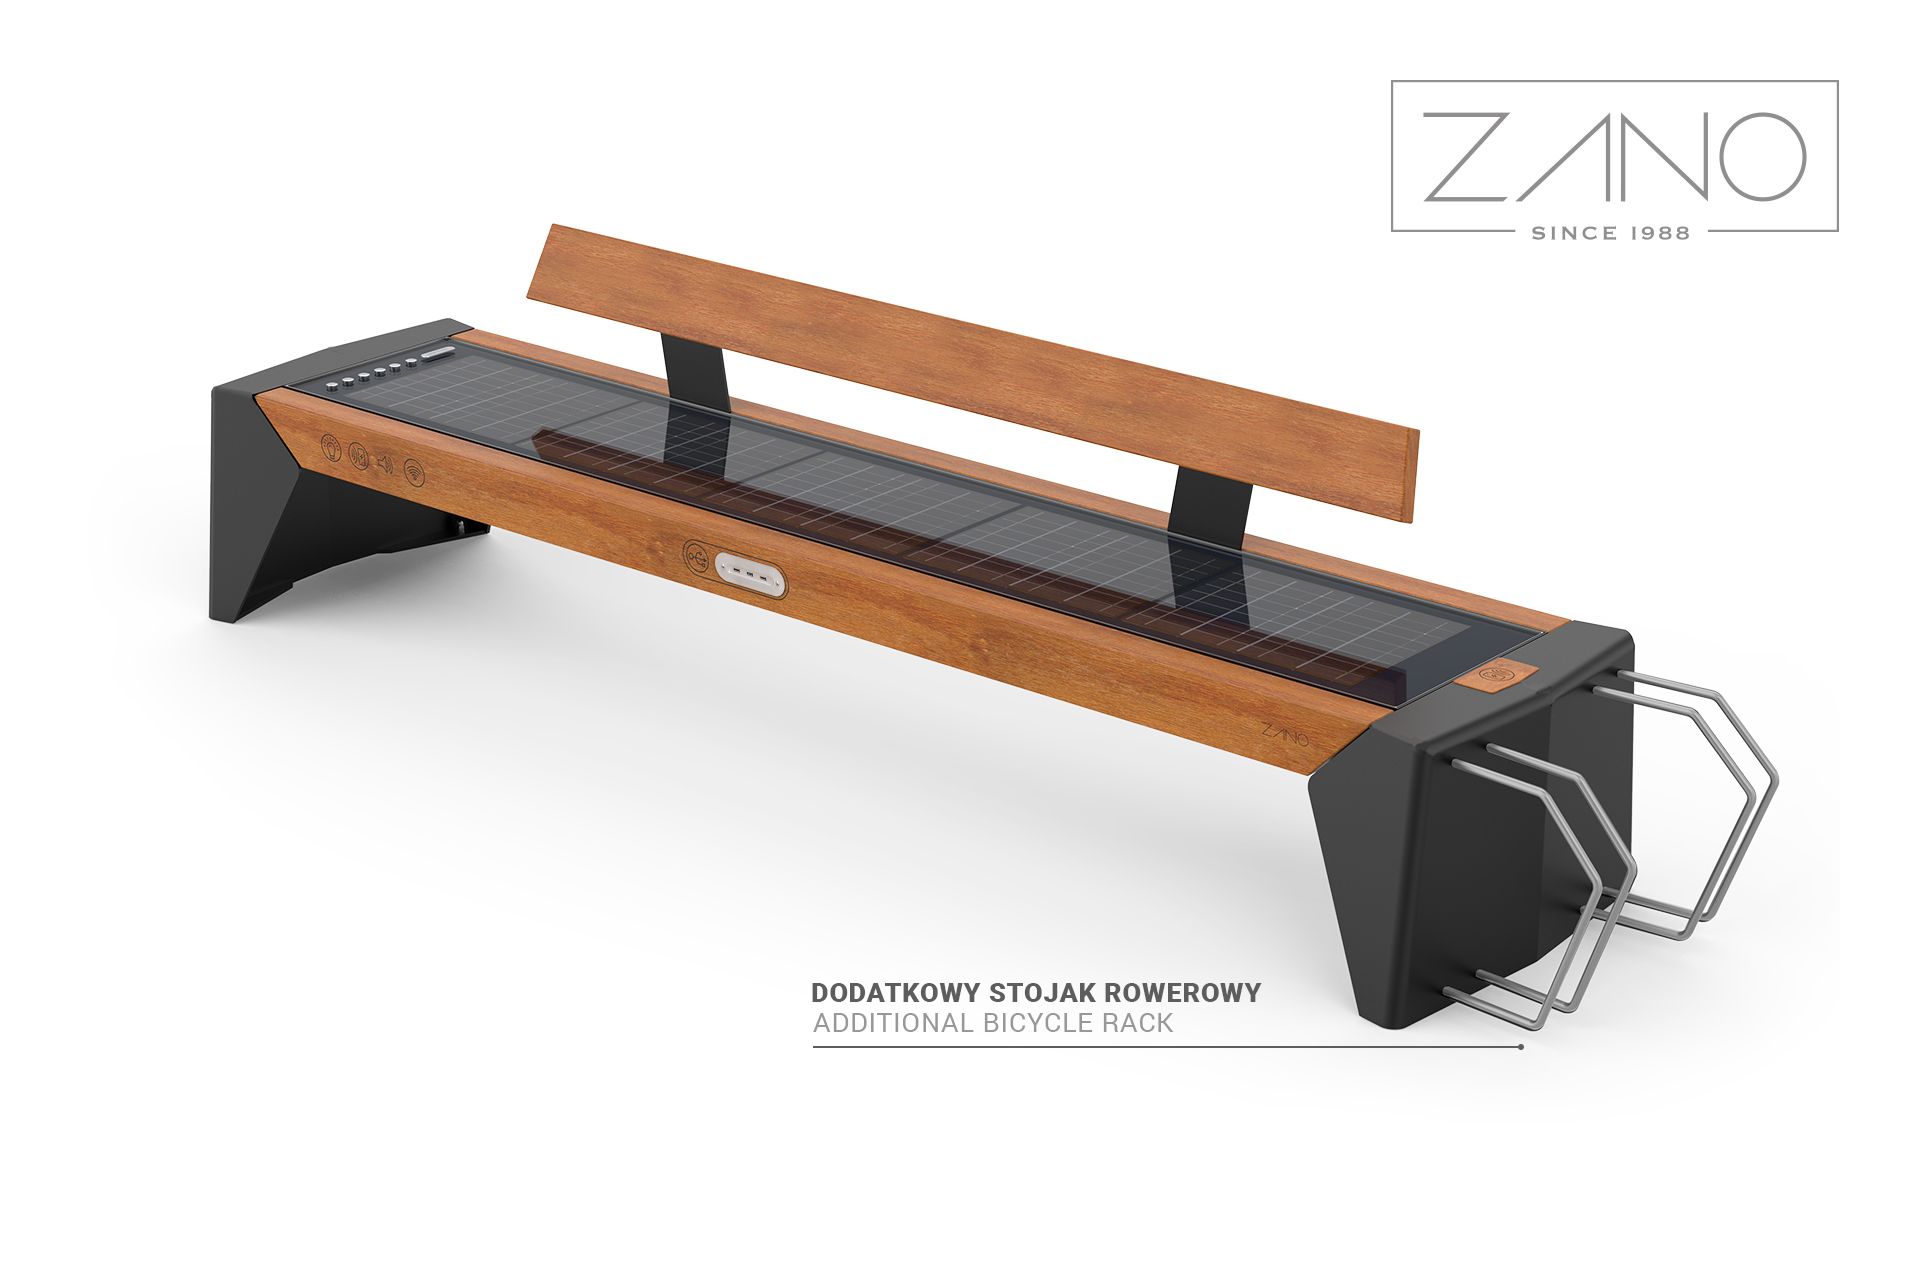 Photon bench with additional bicycle rack and backrest